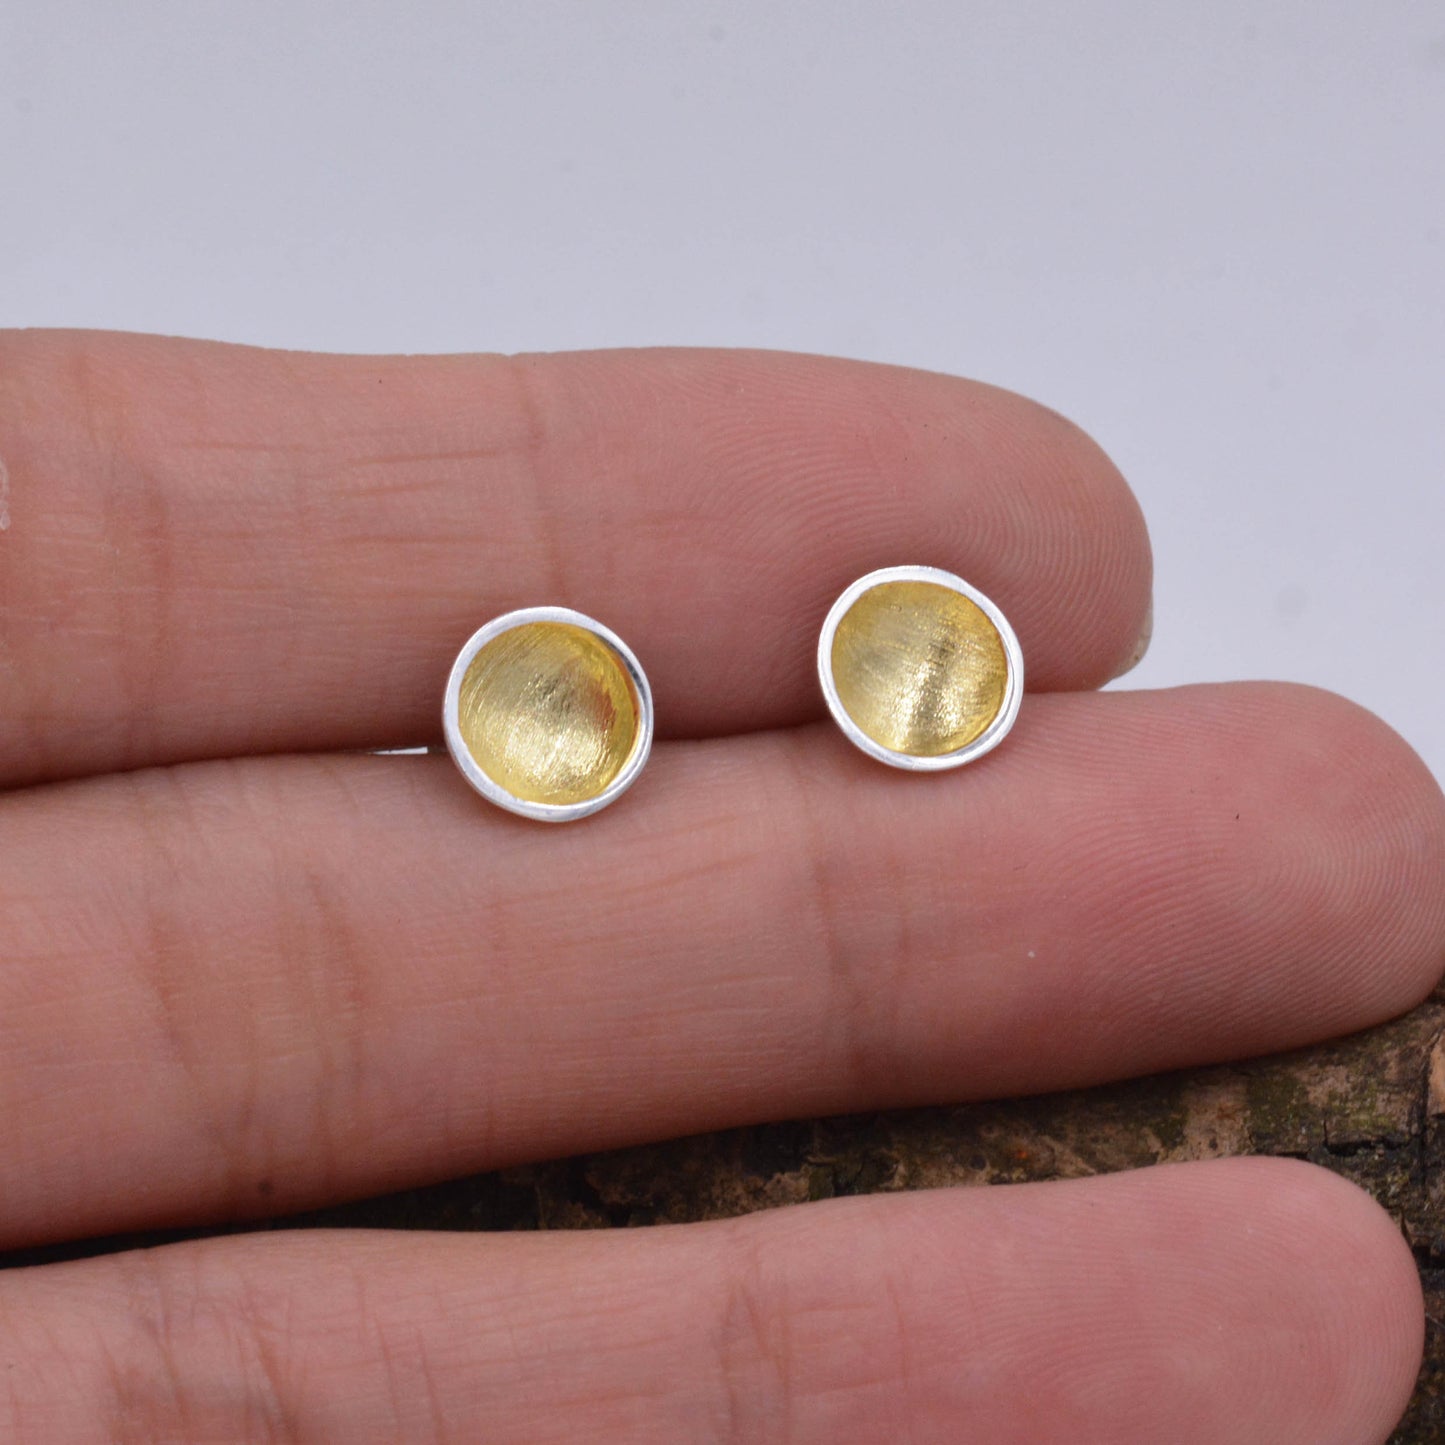 Heart of Gold Little Cup Stud Earrings in Sterling Silver - Geometric Circle Dot Minimalist Design - Plated with 18ct Gold